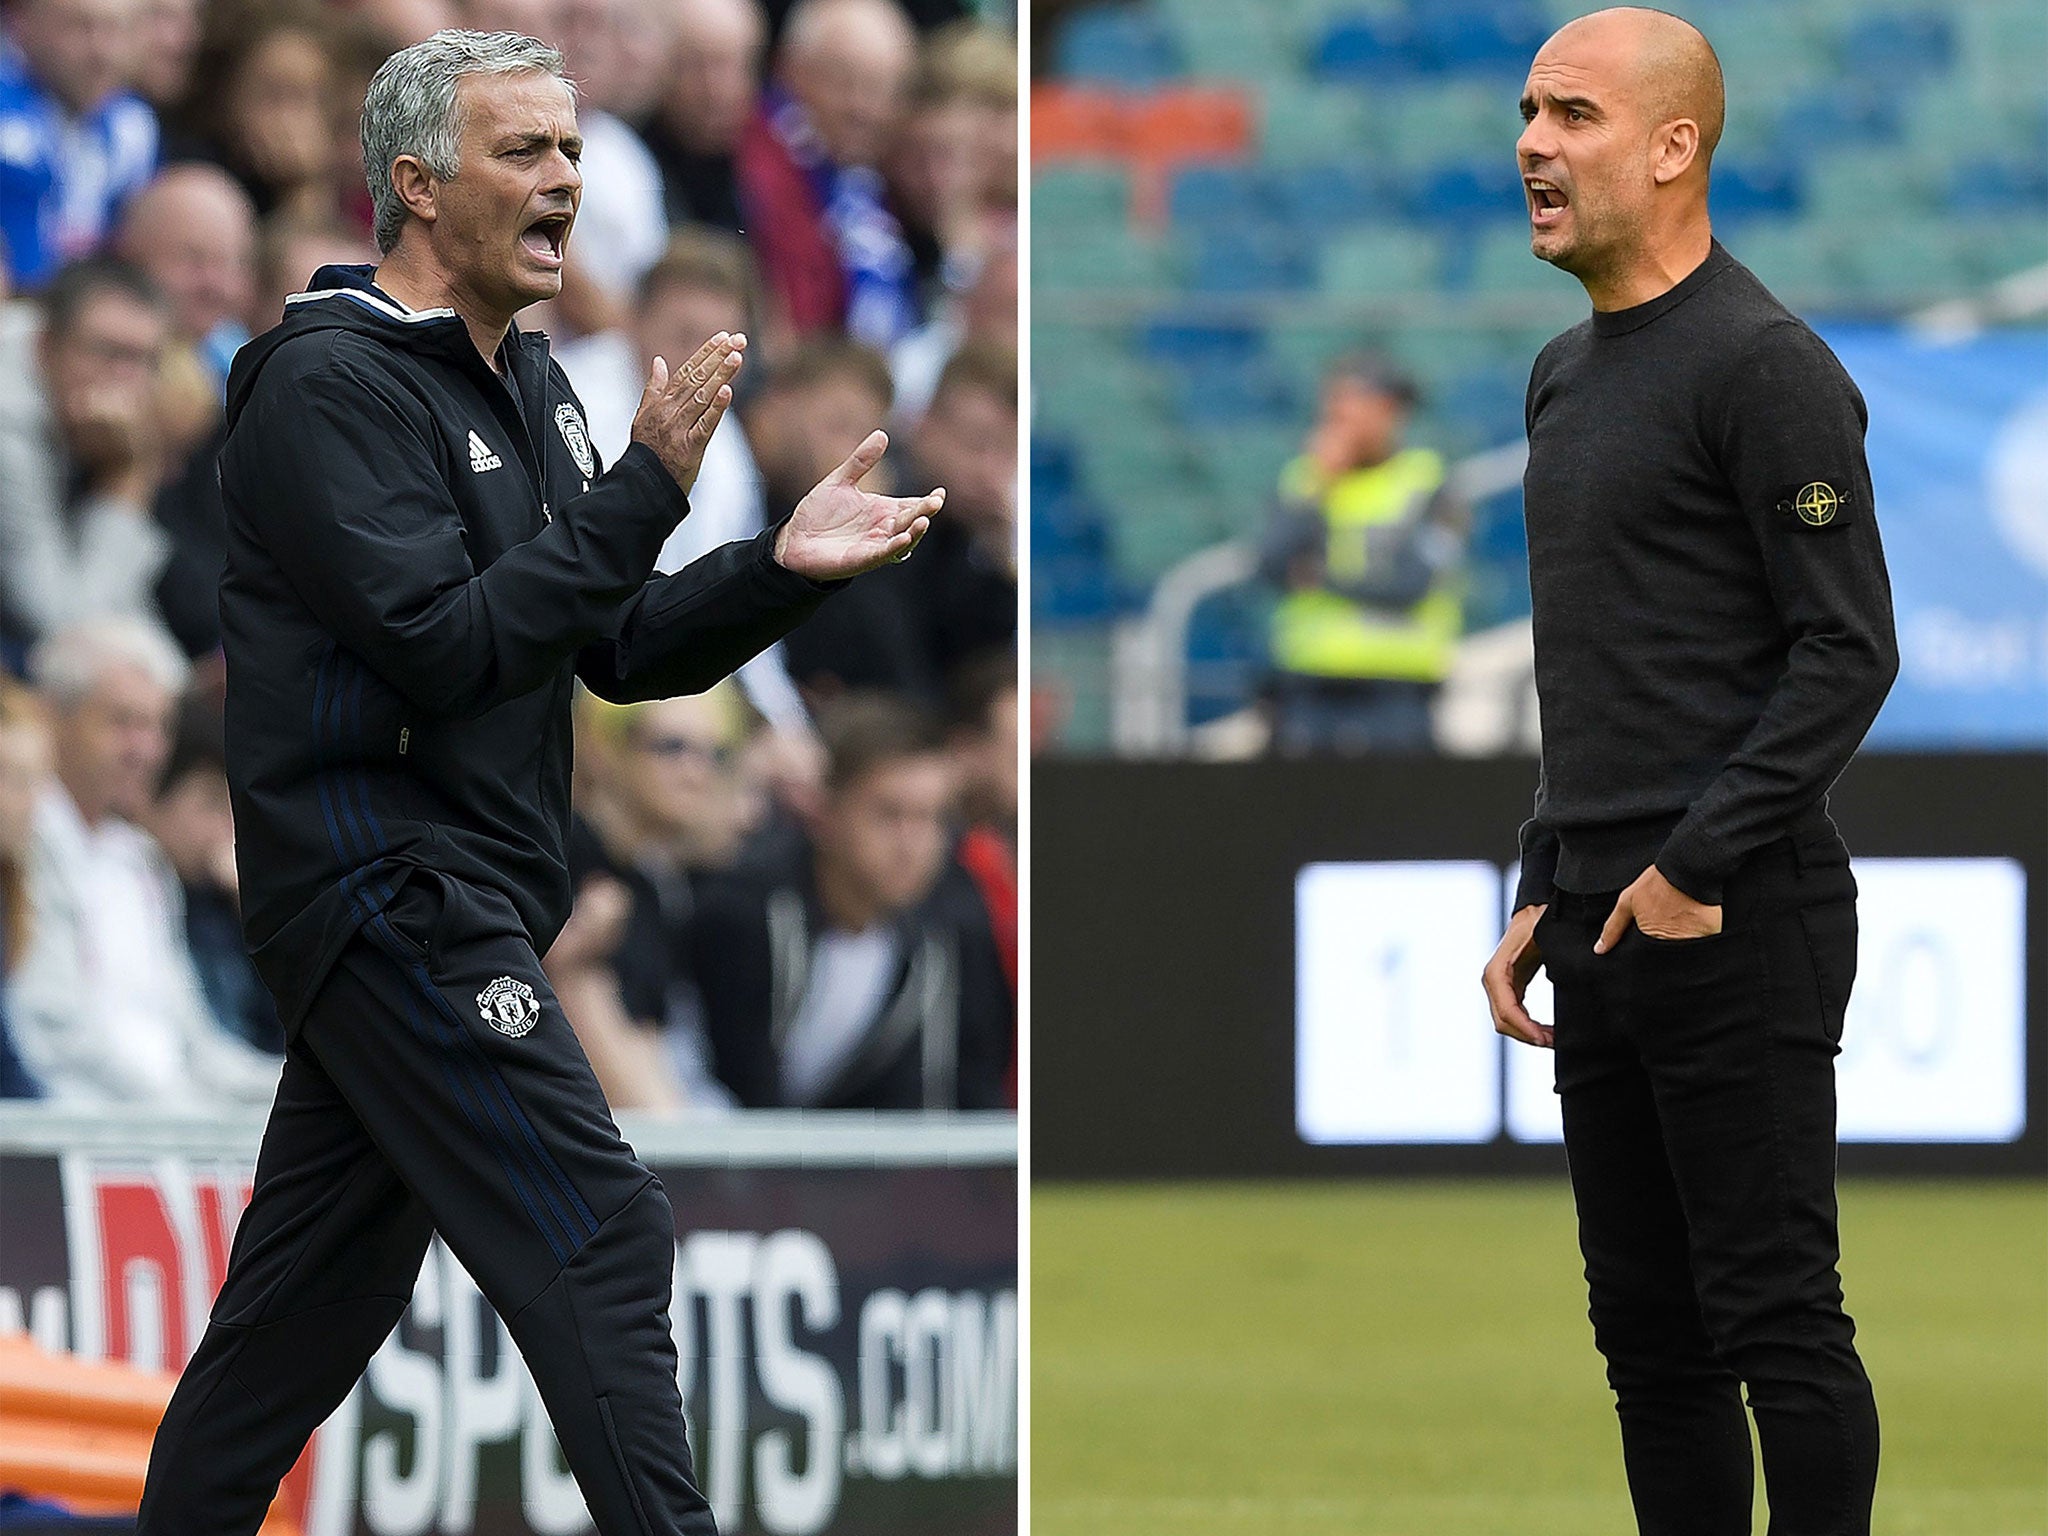 Jose Mourinho and Pep Guardiola will square up against one another once again